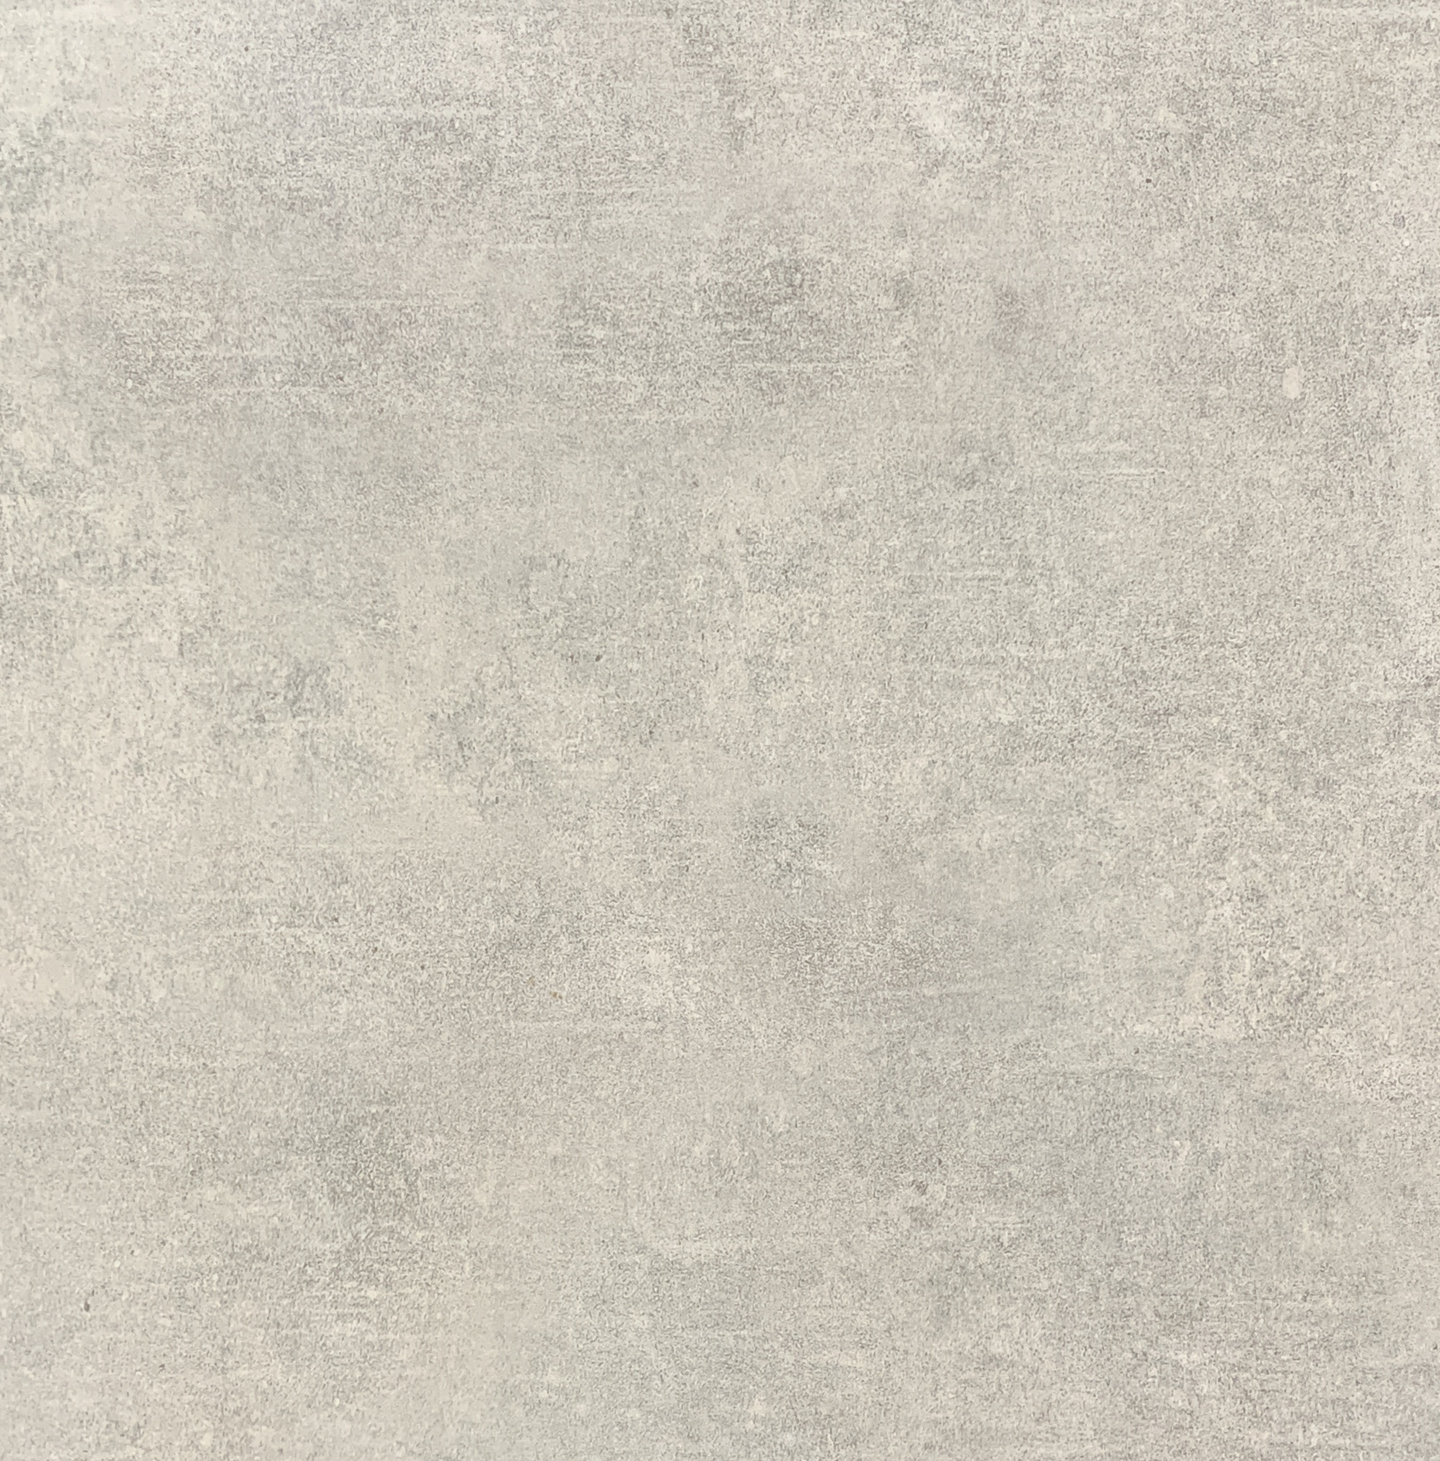 MARQUIS GREY | Marquis Grey Rectified. Tile Samples Sydney